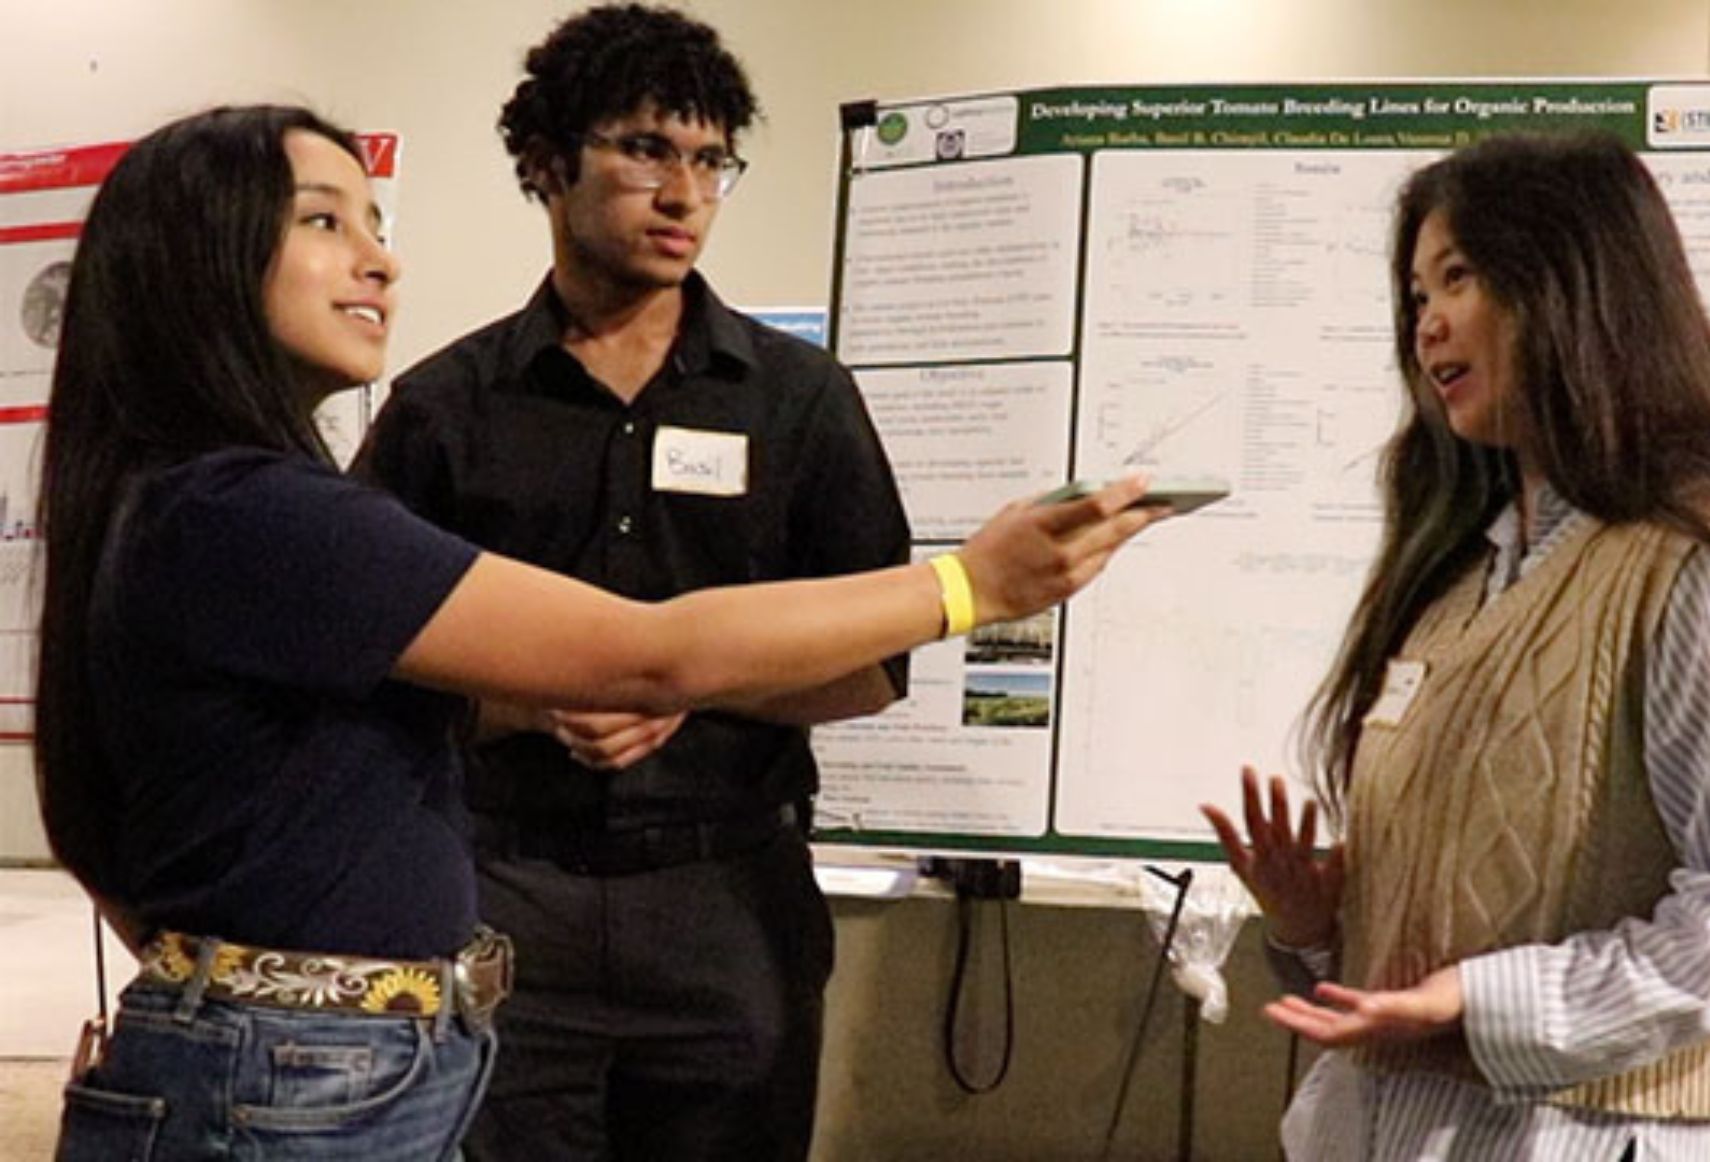 Office of Undergraduate Research Celebrates Six Years of Empowering Students Through Summer Undergraduate Research Experience 